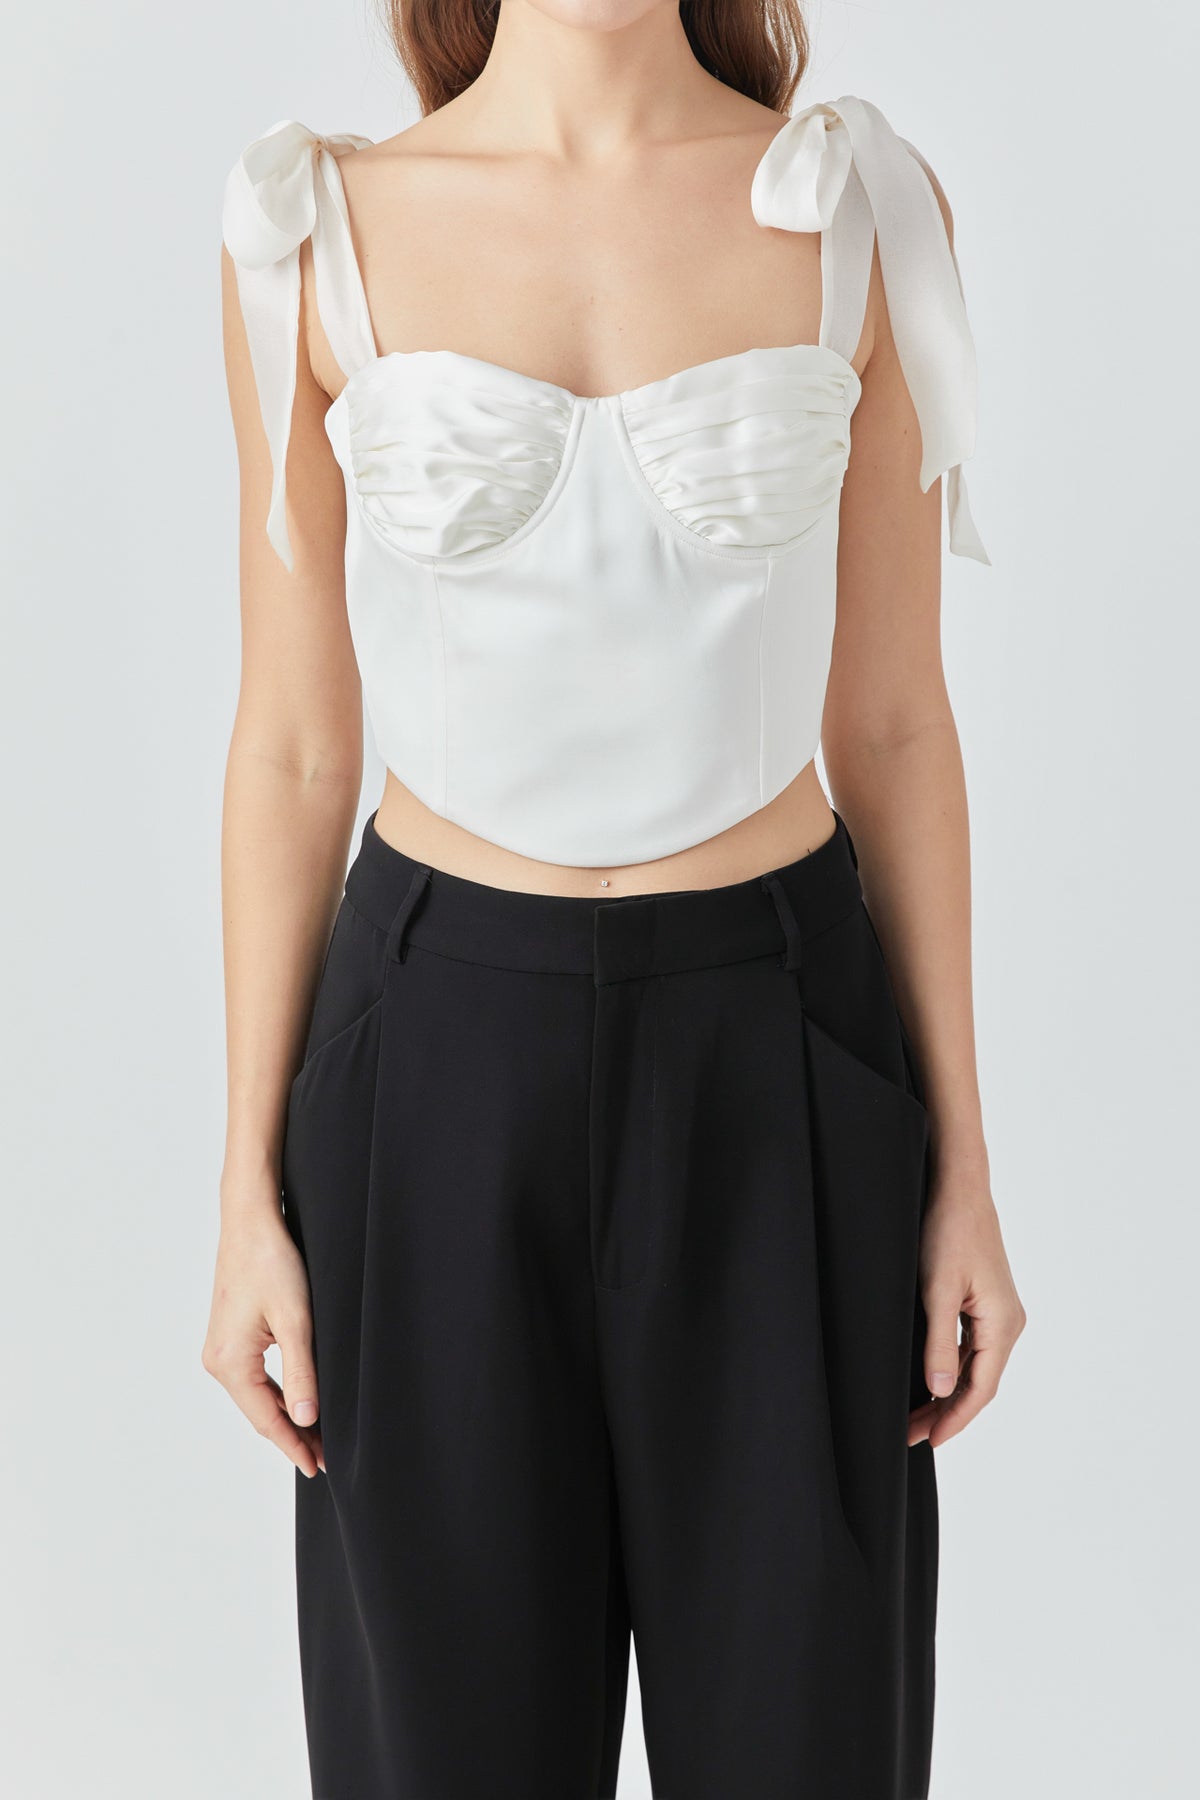 ENDLESS ROSE - Satin Bustier Top - TOPS available at Objectrare